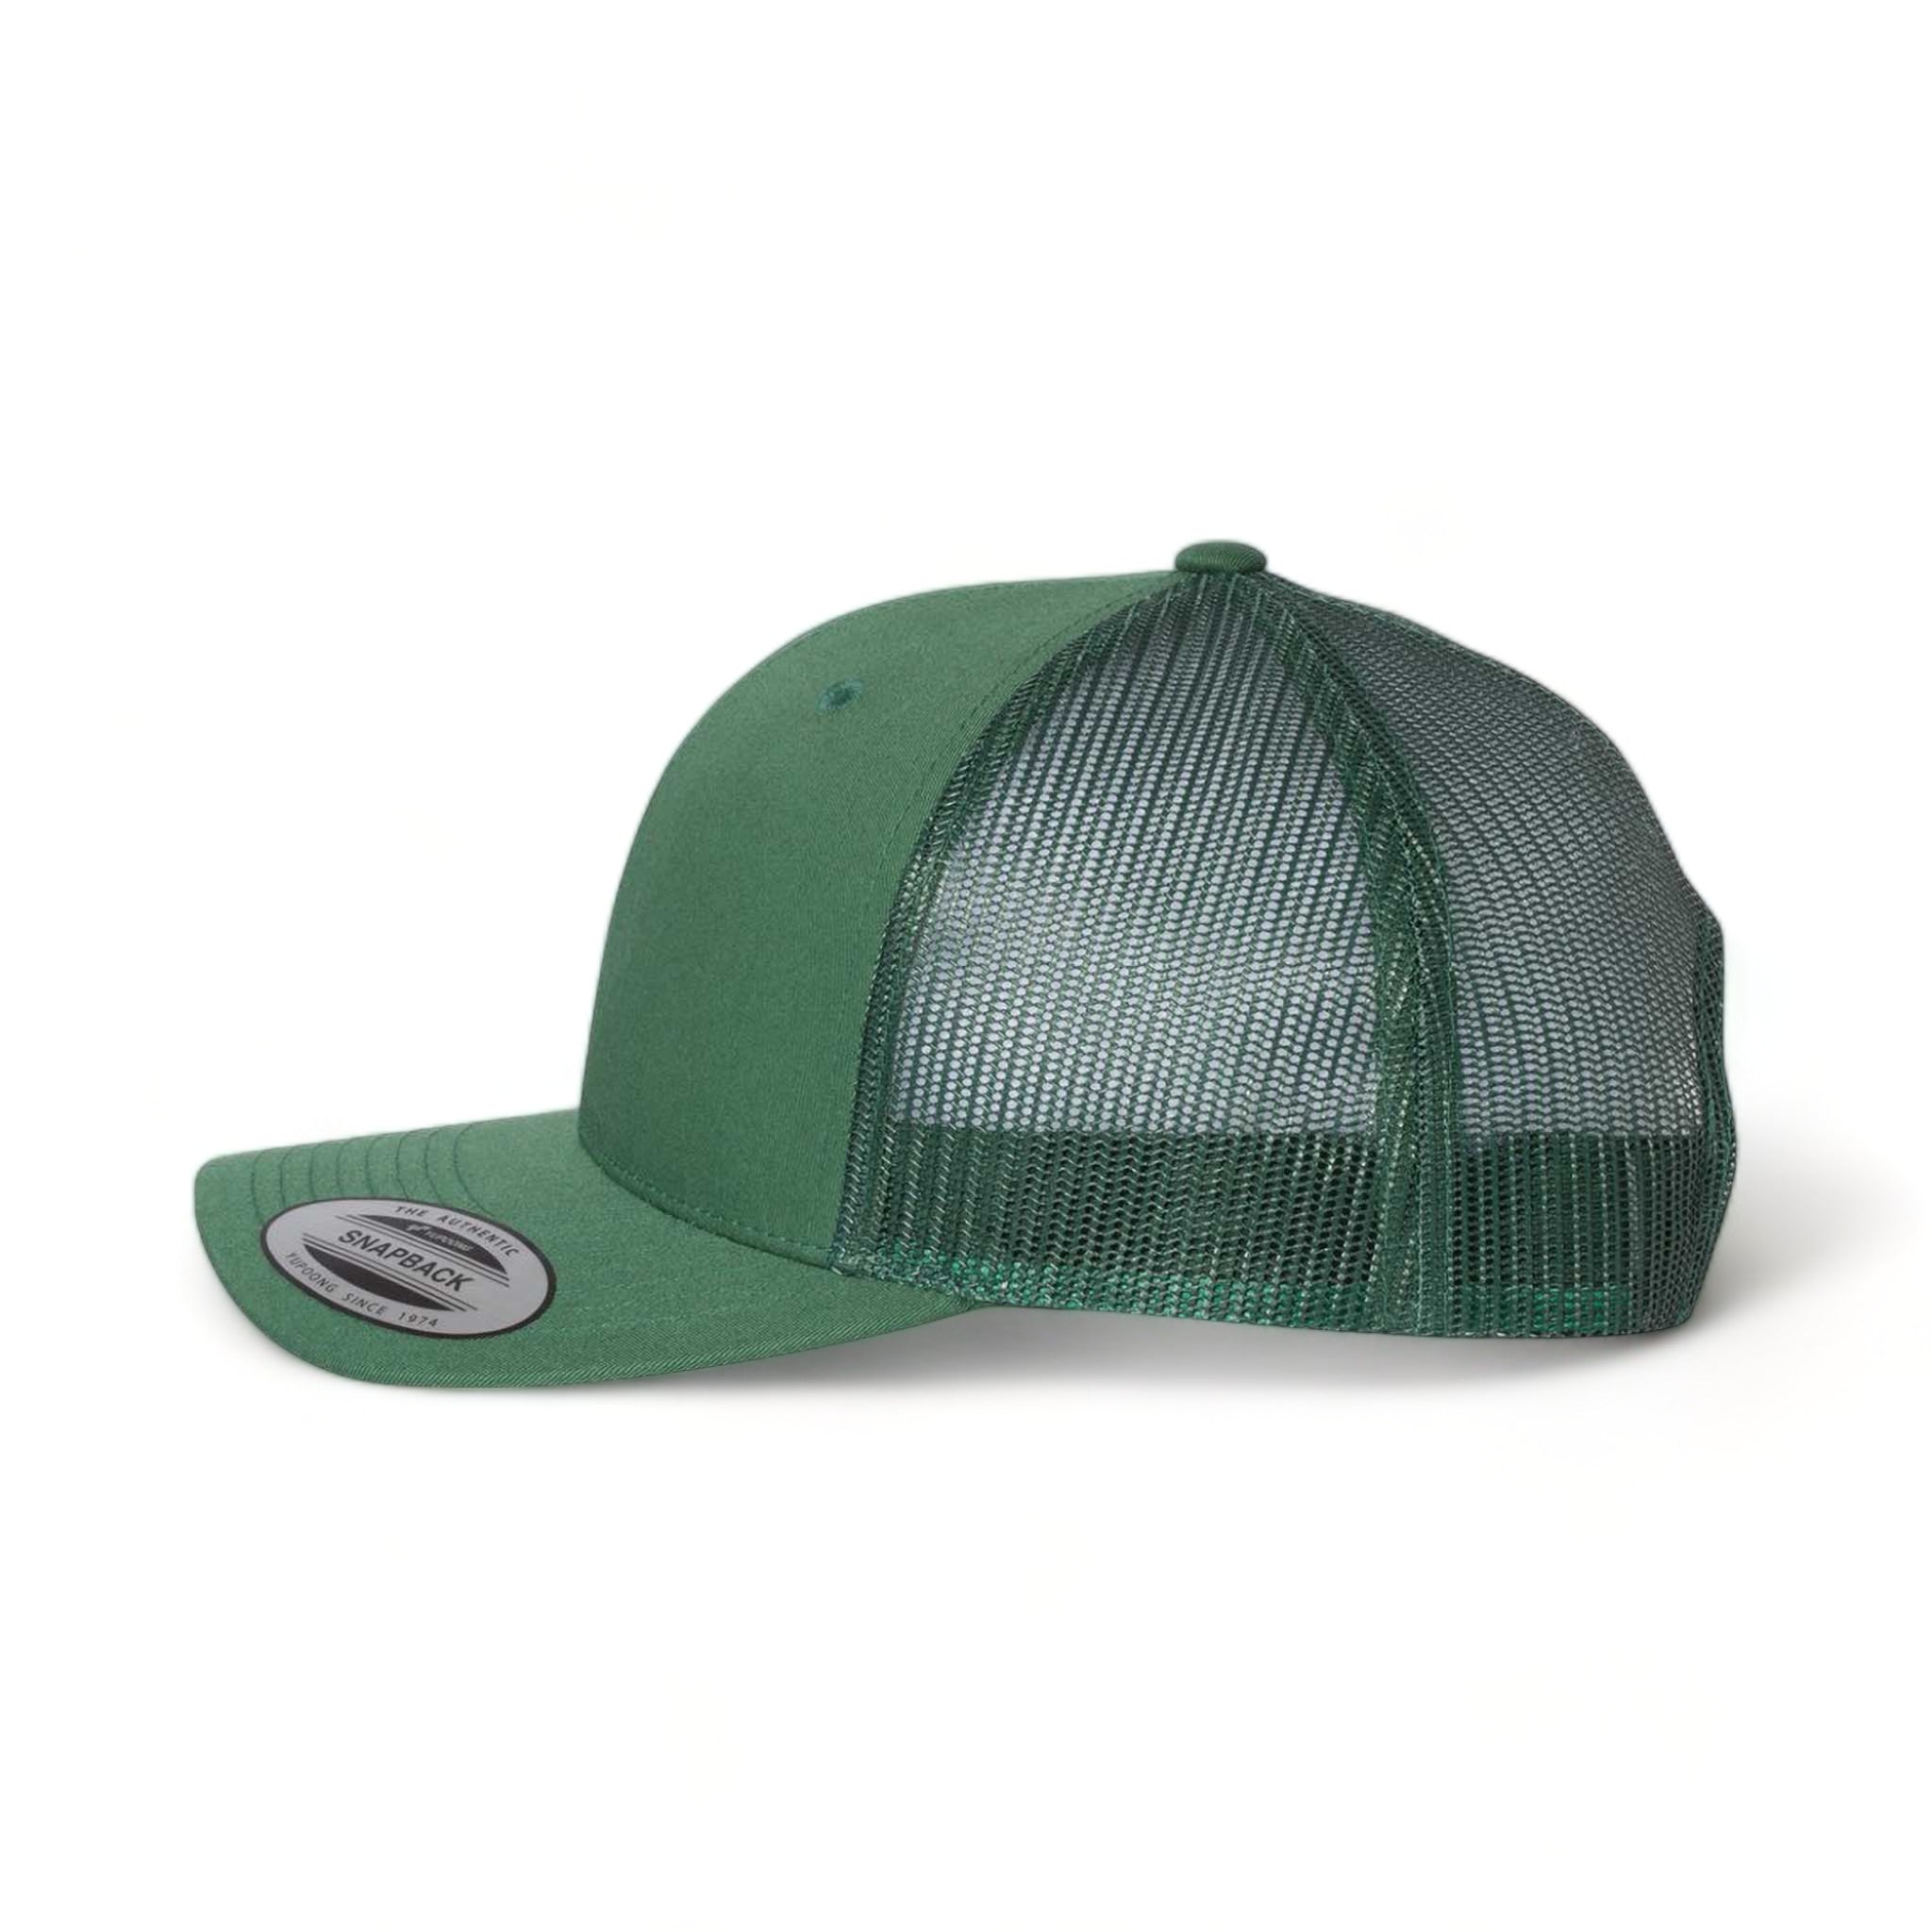 Side view of YP Classics 6606 custom hat in evergreen